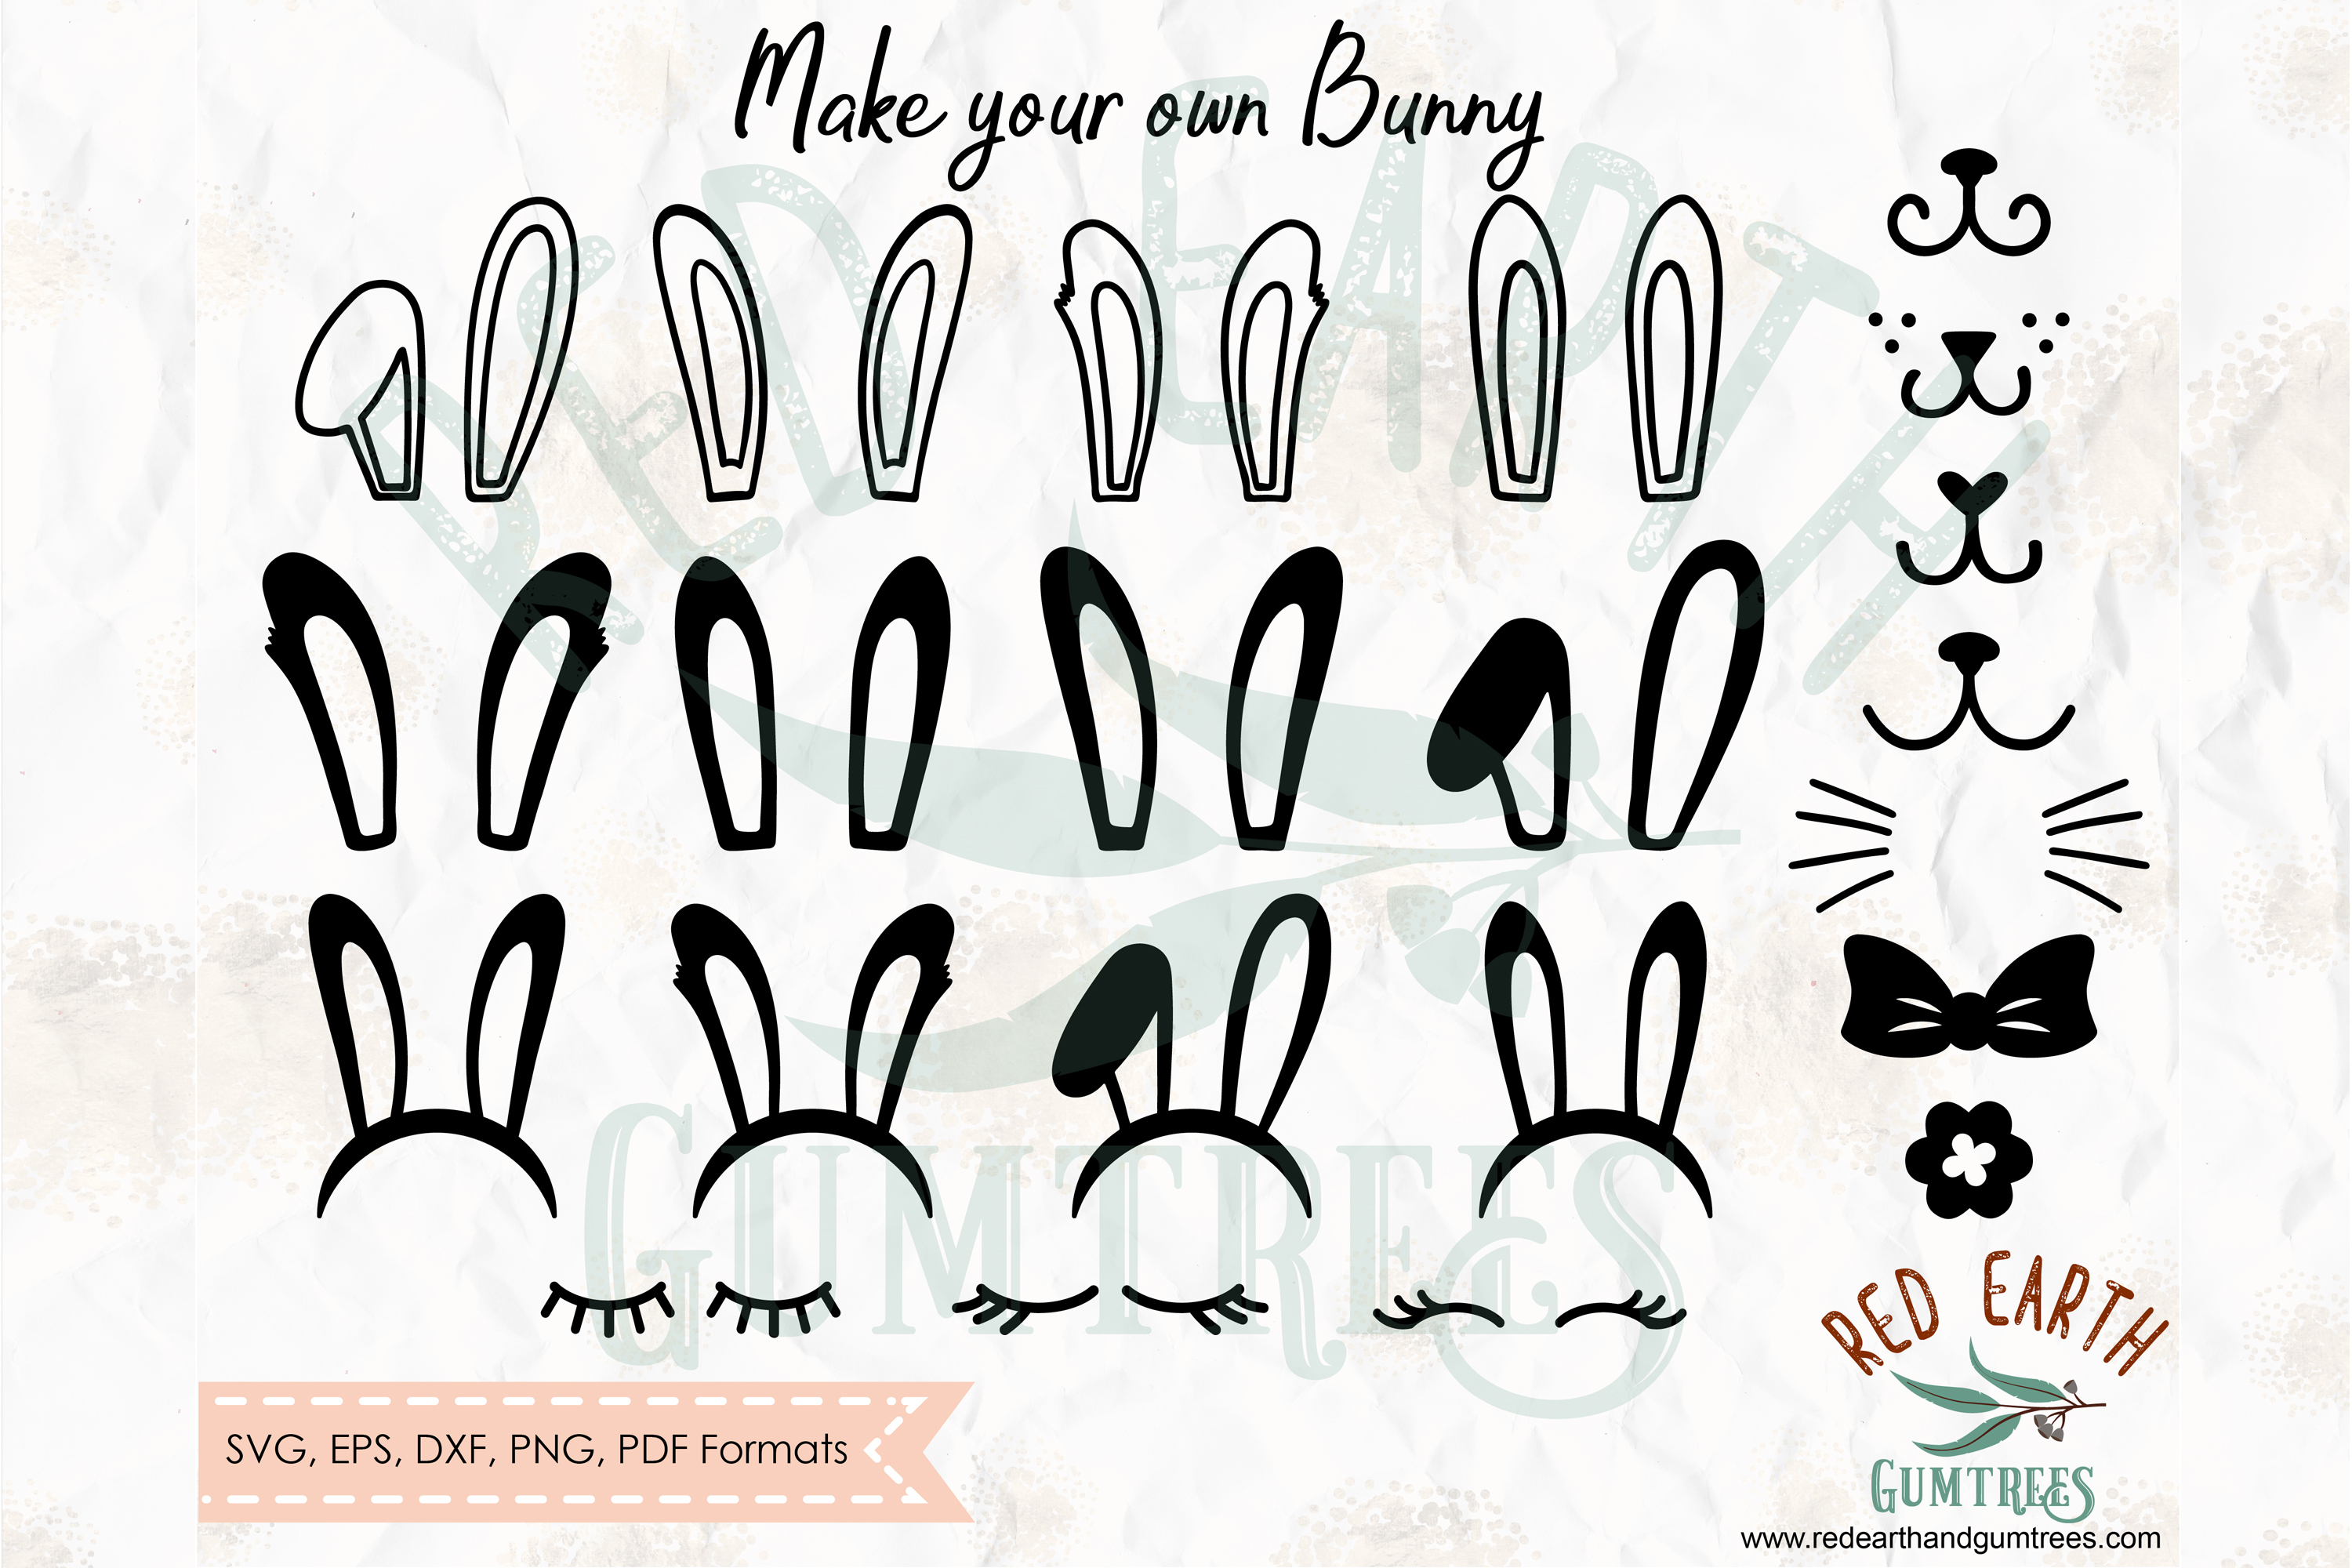 Make your own Easter rabbit, bunny ears in SVG,DXF,PNG,EPS